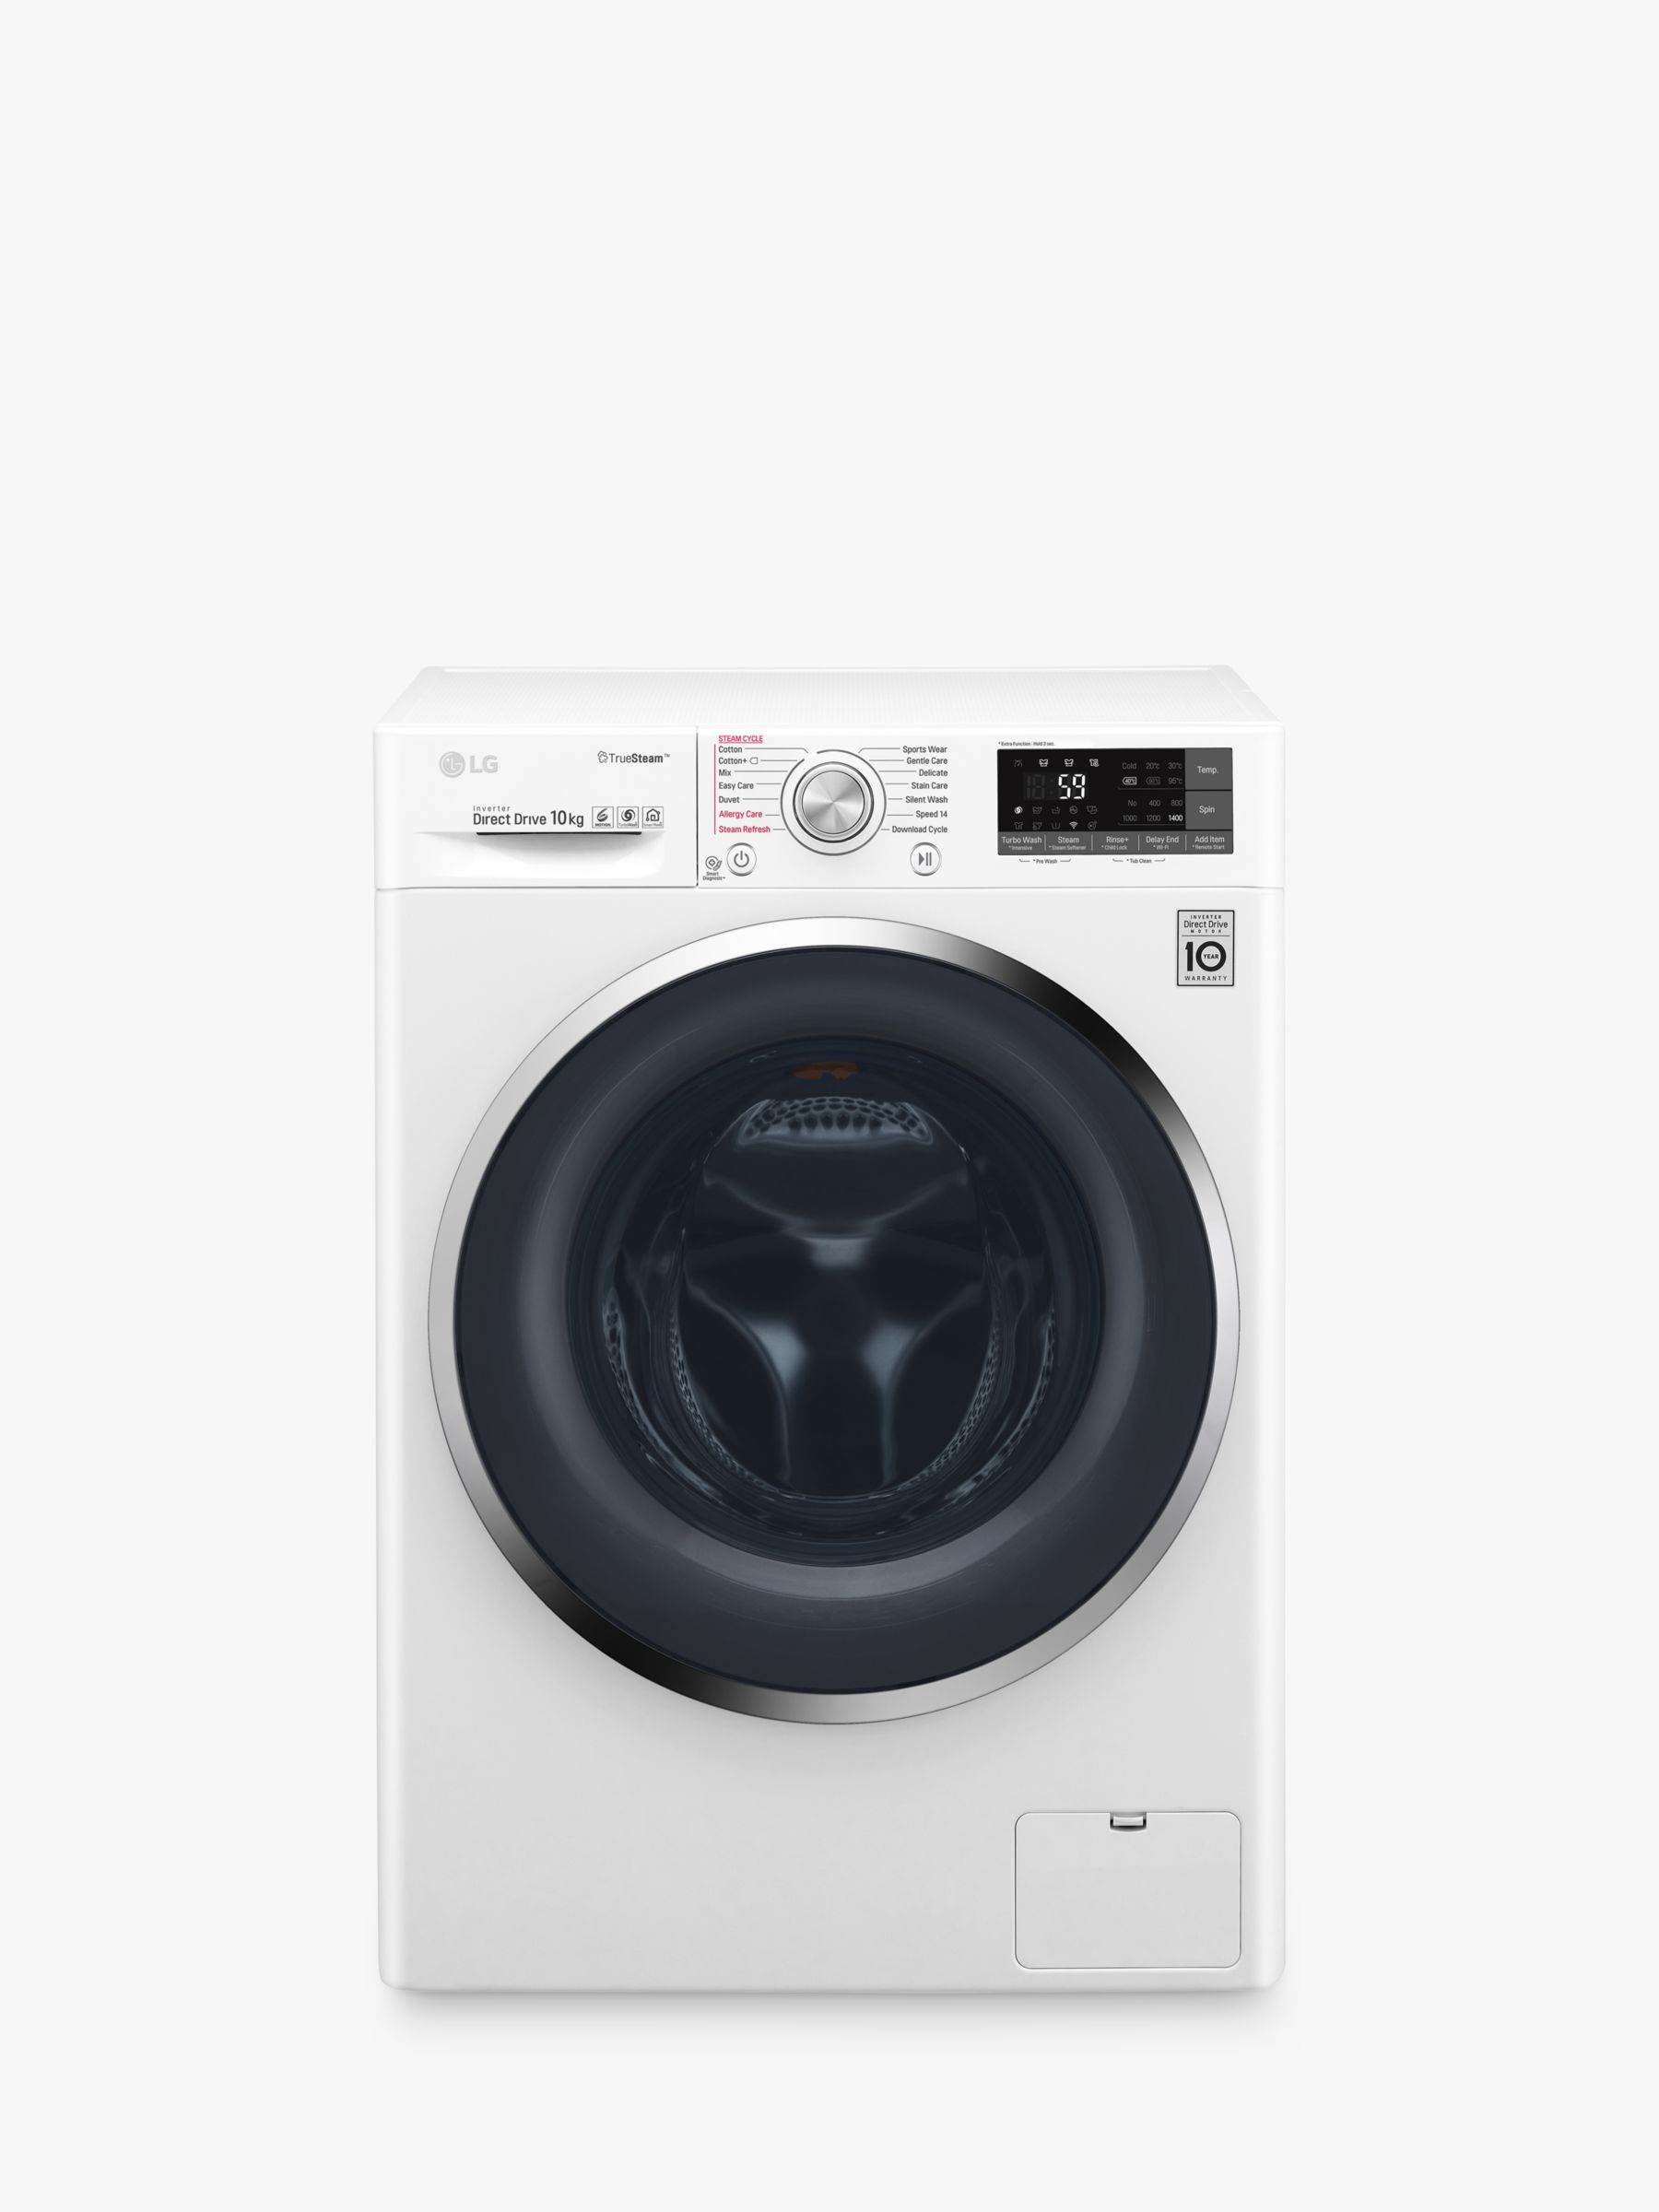 LG F4J8JS2W Freestanding Washing Machine, 10kg Load, A+++ Energy Rating, 1400rpm Spin, White